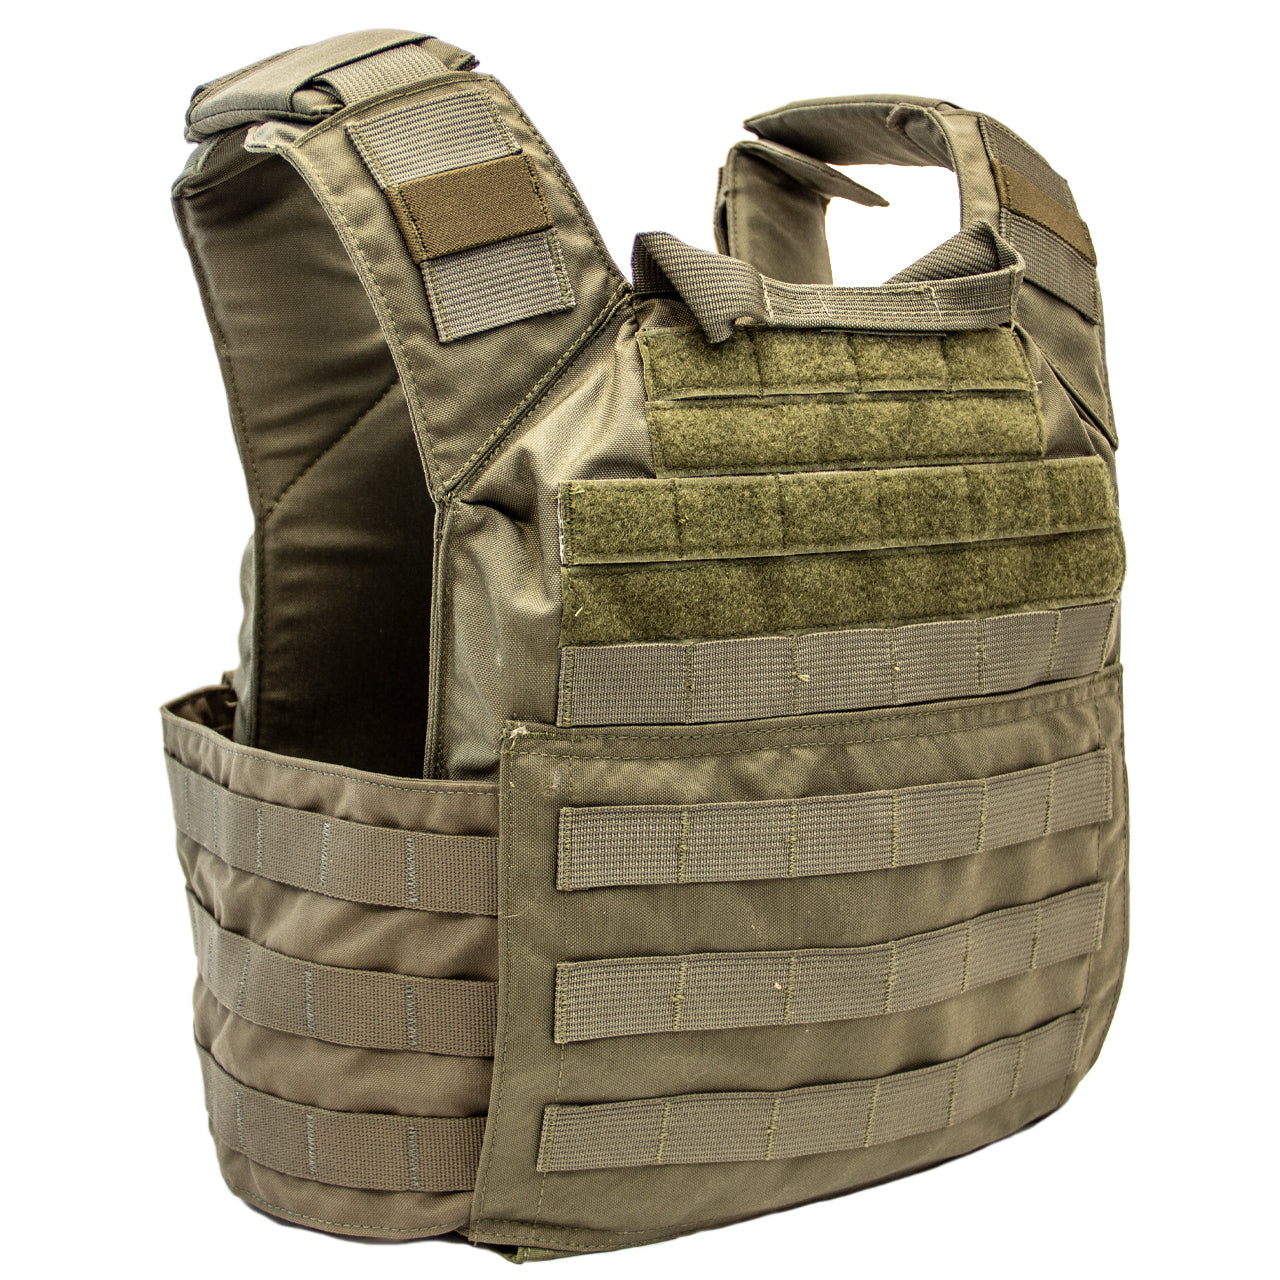 A Shellback Tactical Banshee Rifle Plate Carrier on a white background.